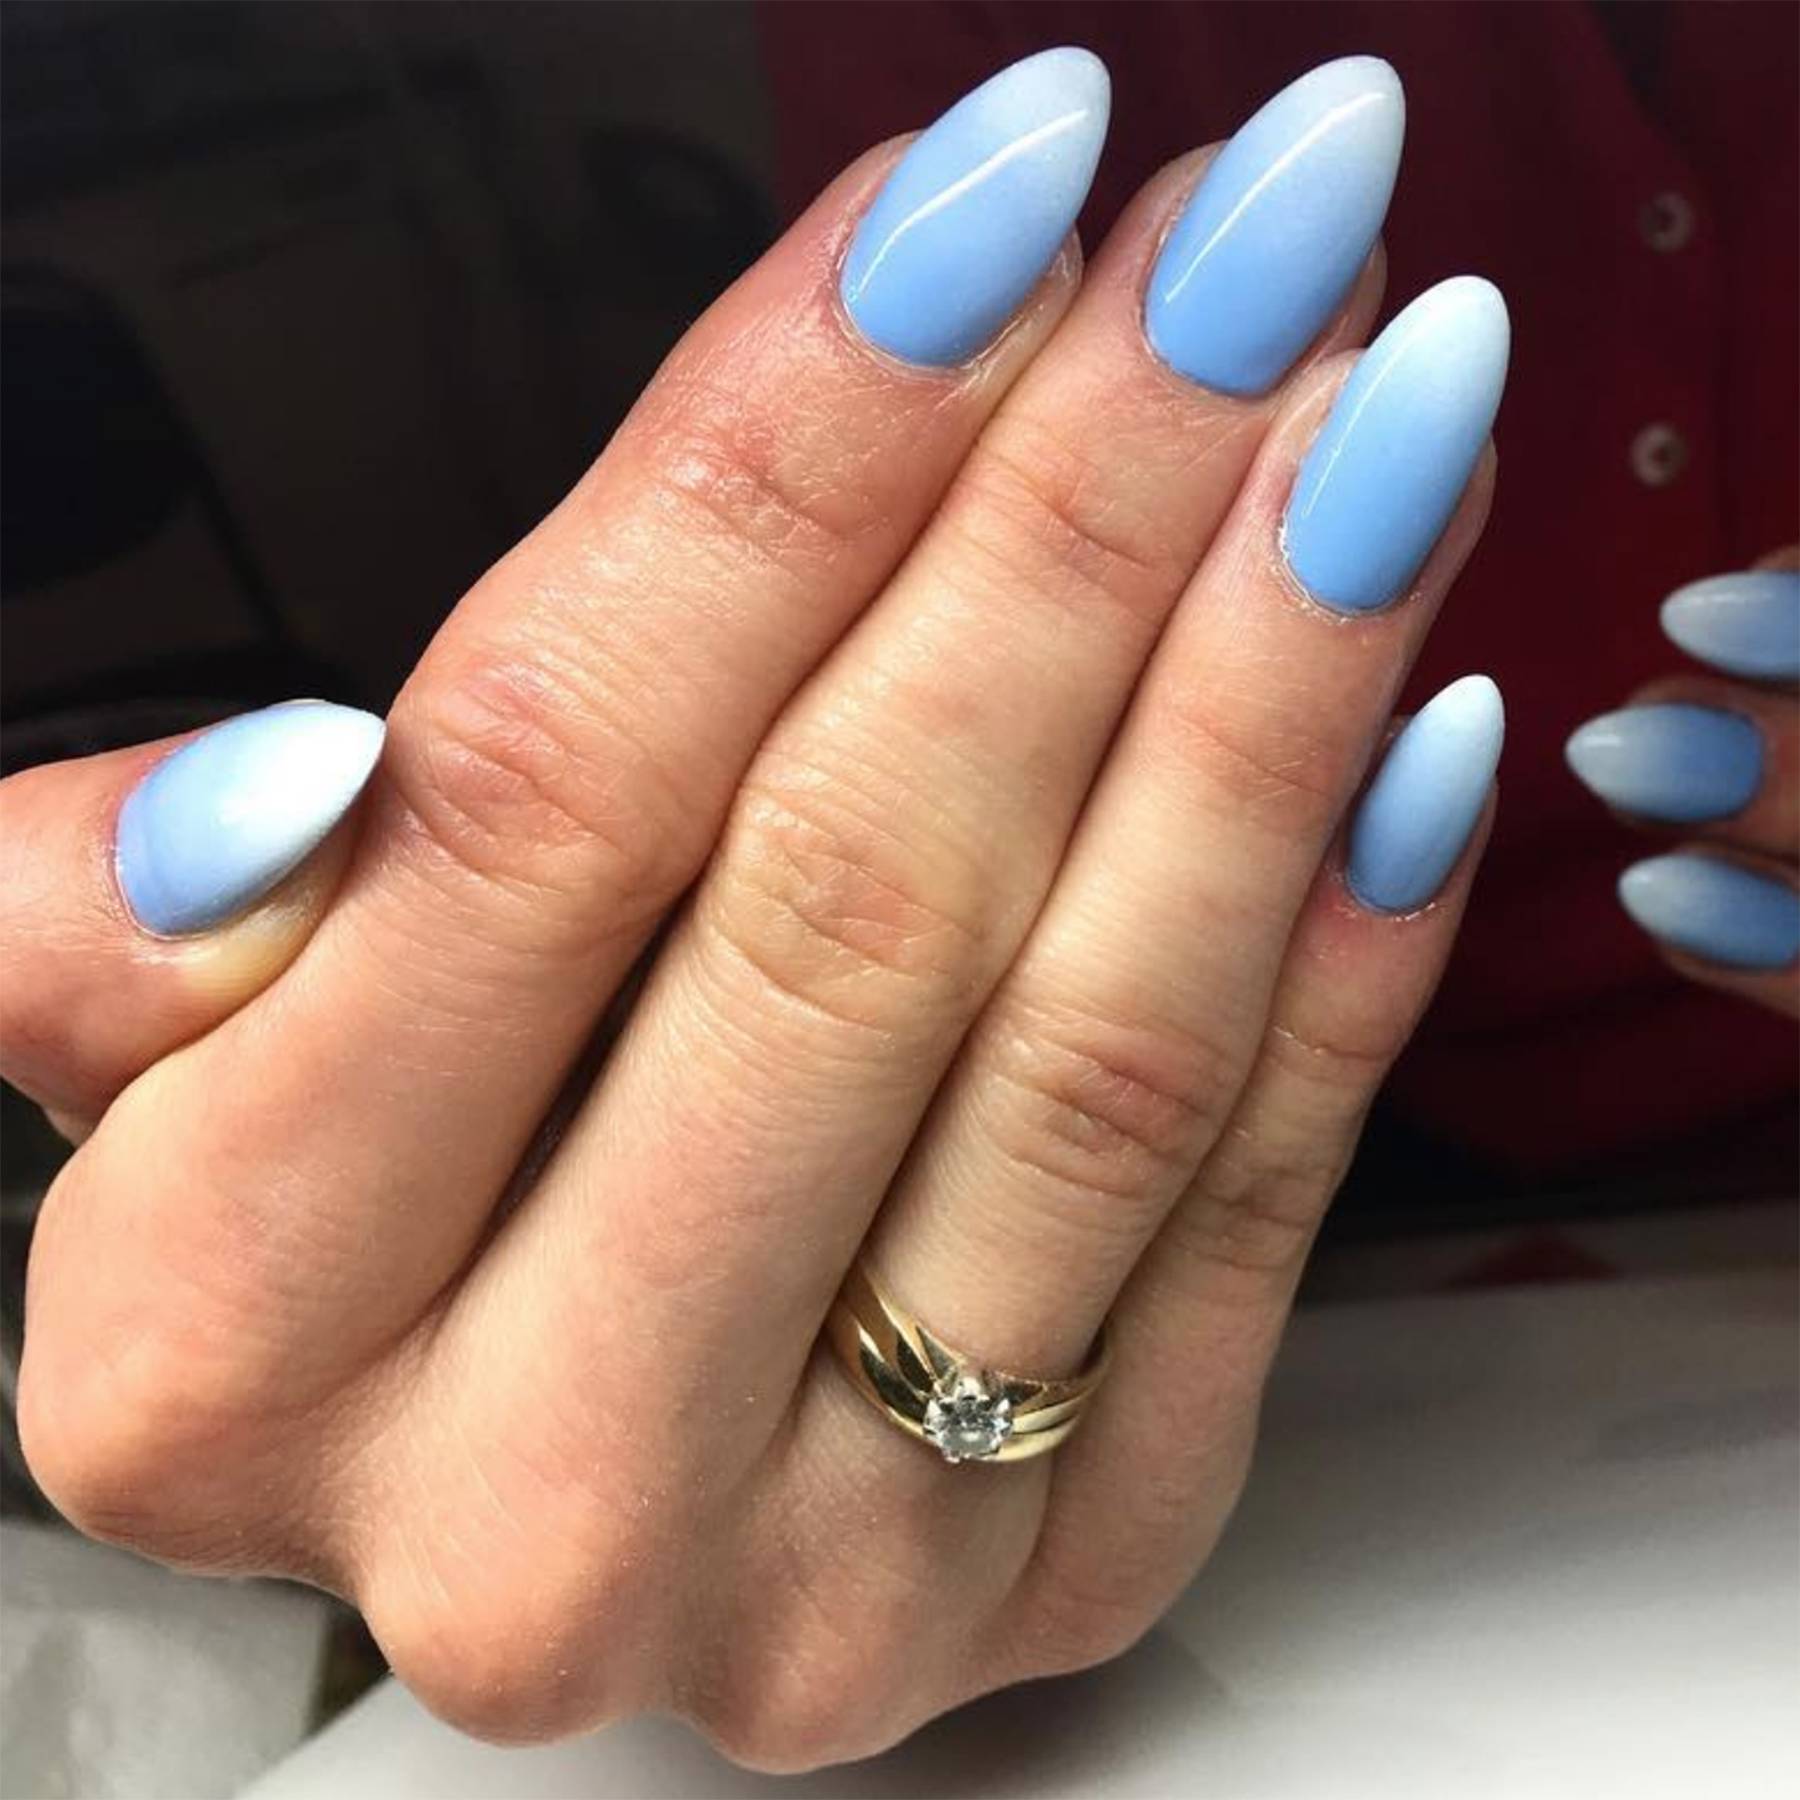 Ombre Nails Designs Ideas For Ombre Nail Art Glamour Uk No sponge blue and...